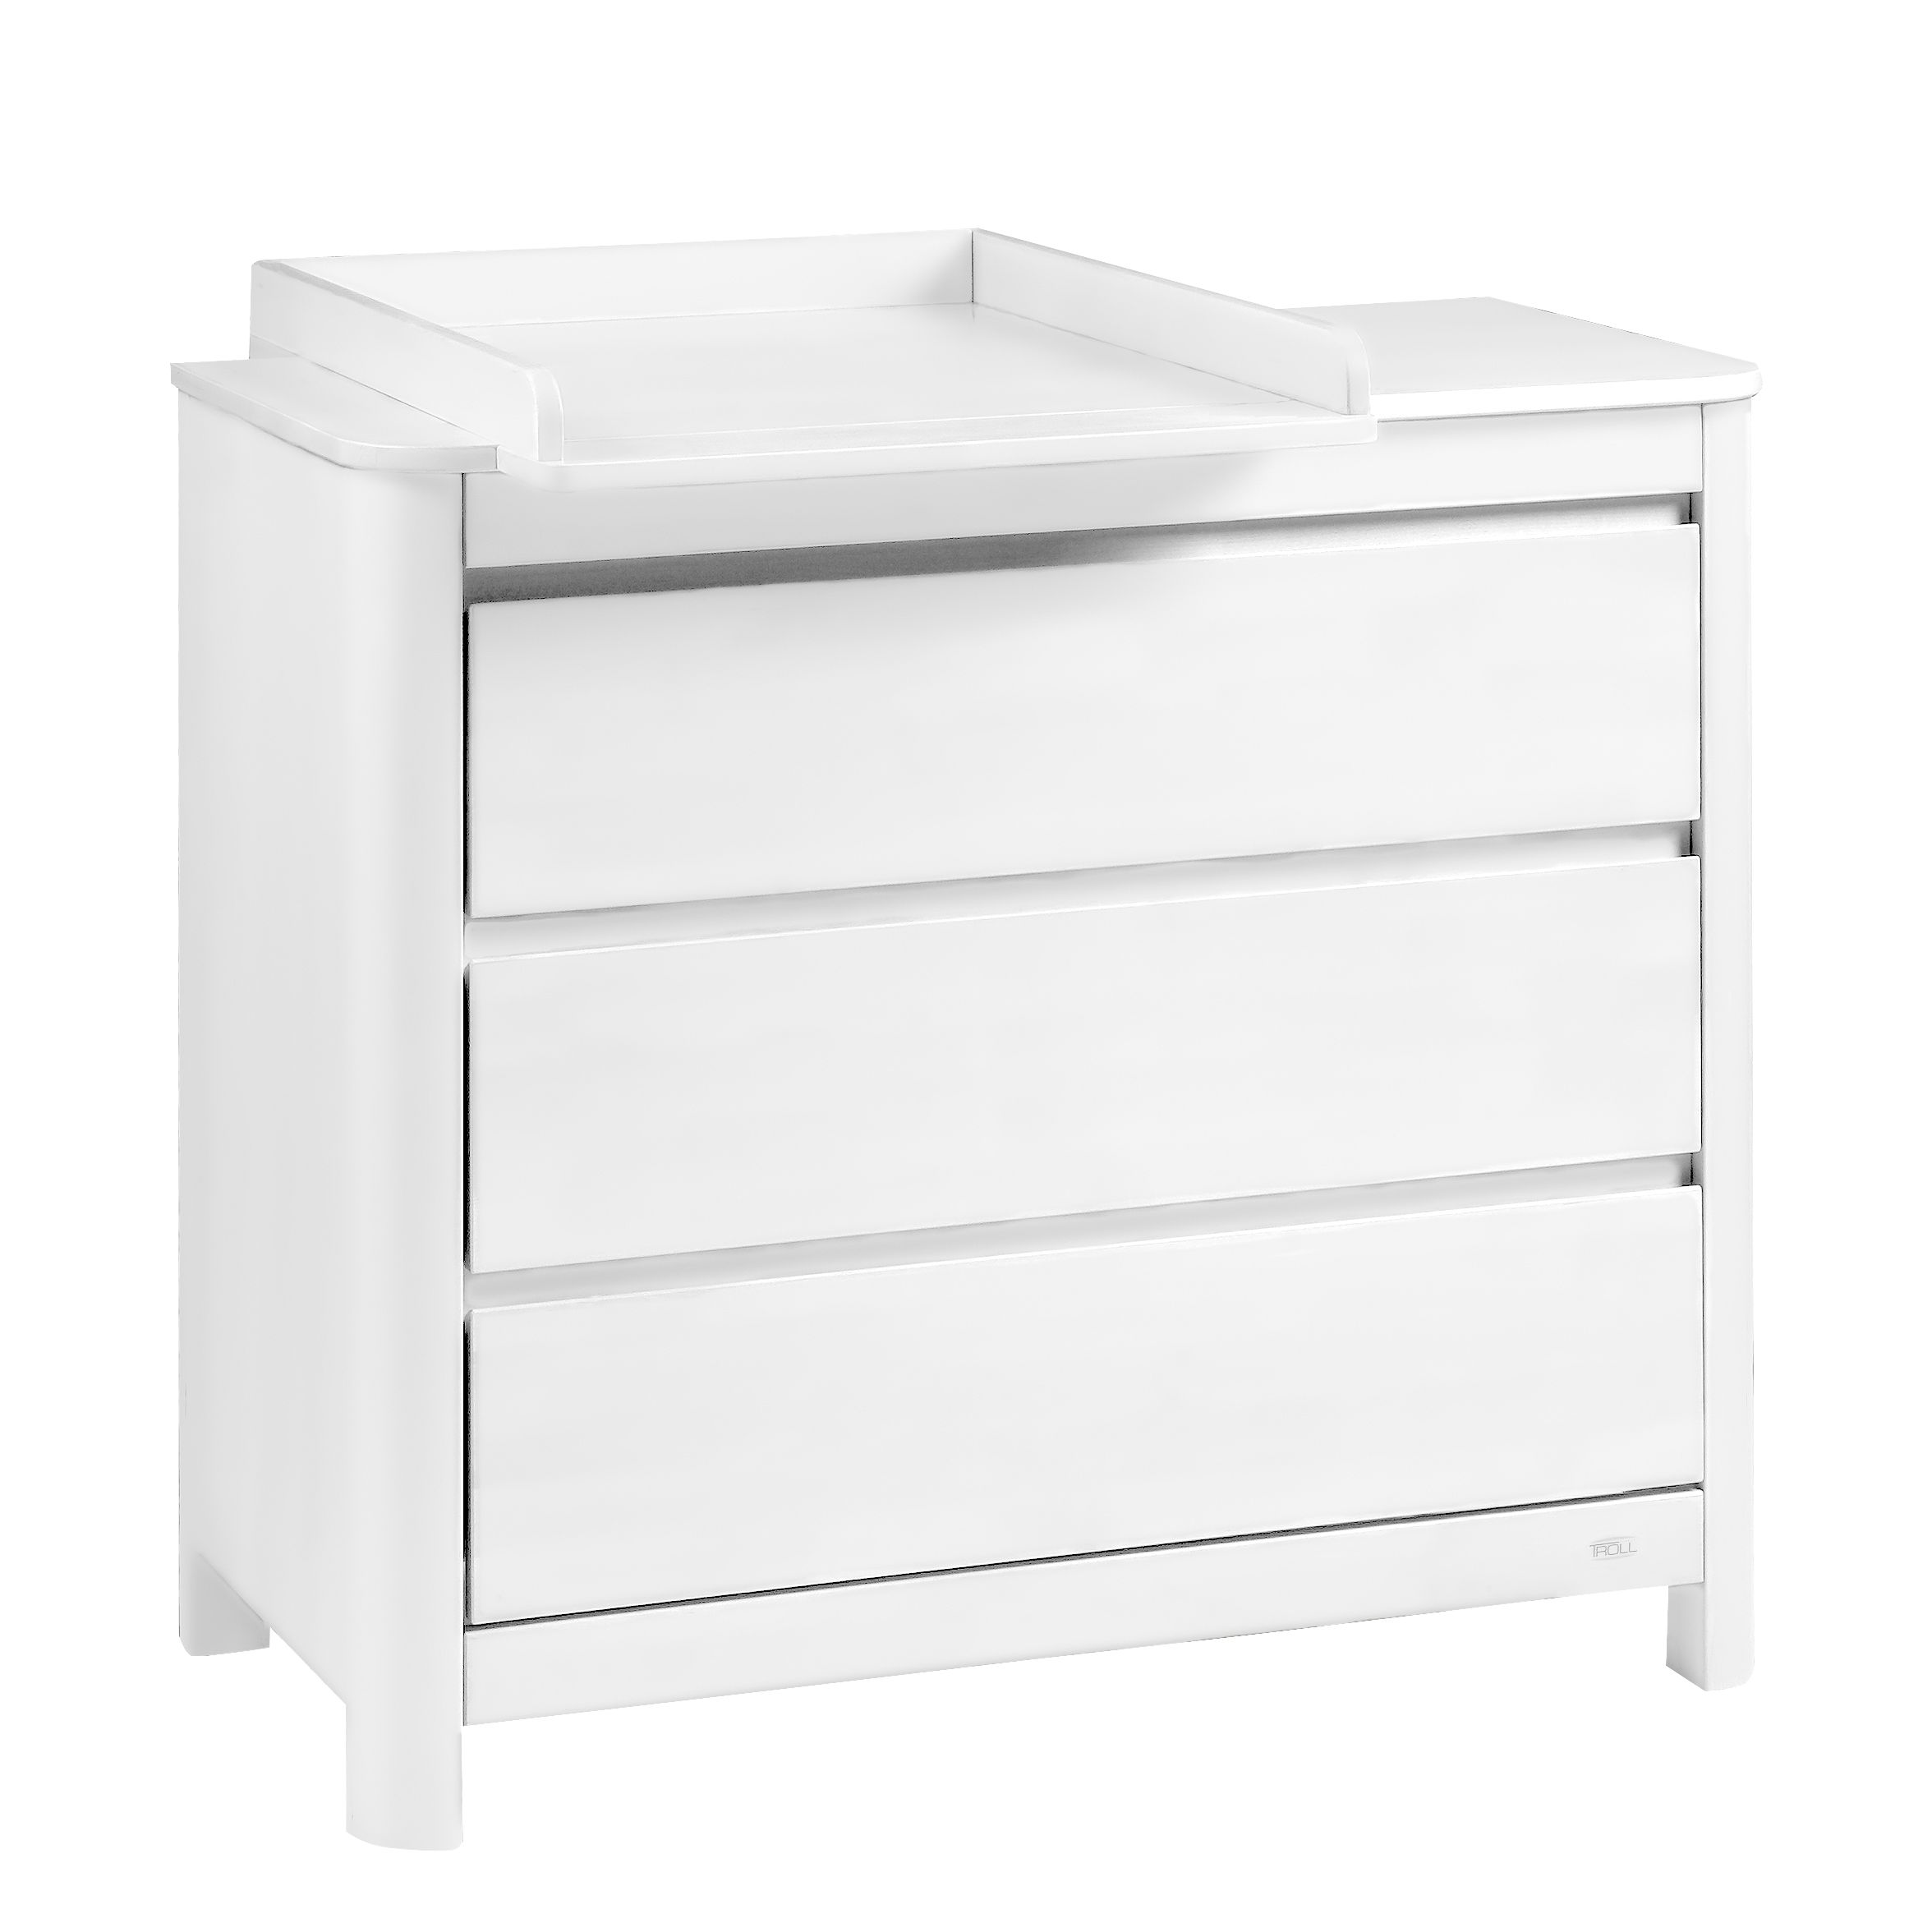 John Lewis Troll Sun Chest of Drawers with Changing